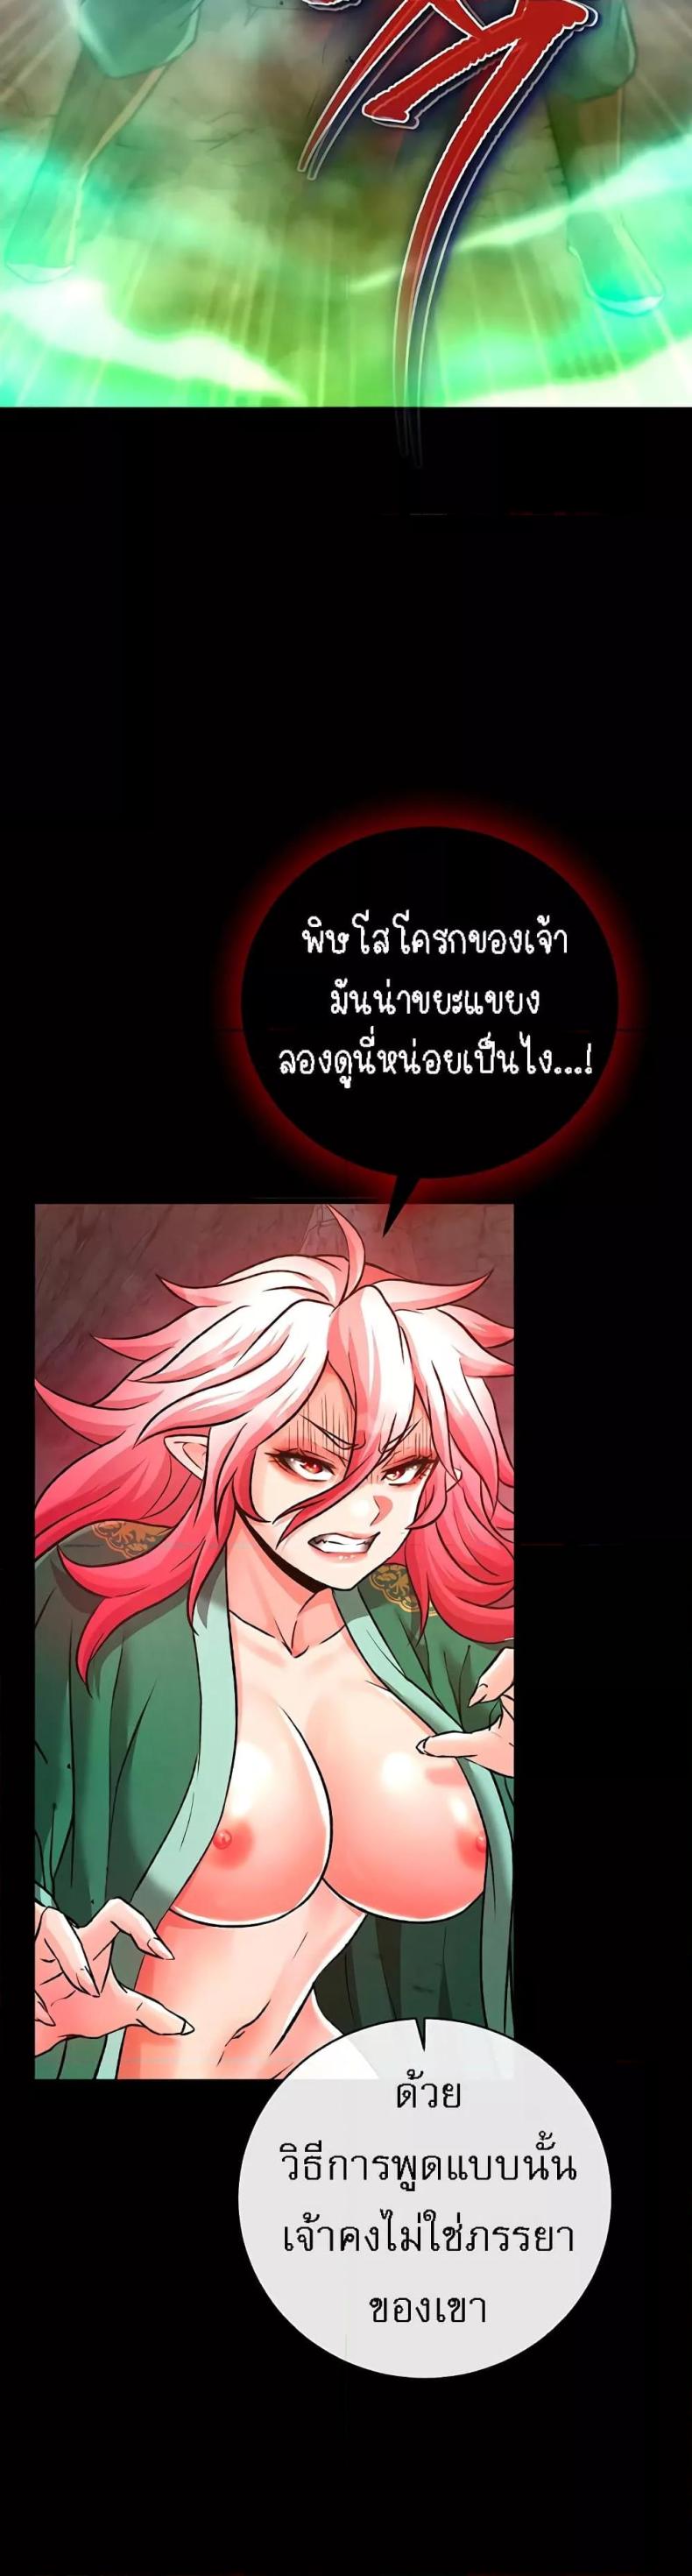 I Ended Up in the World of Murim 29 ภาพที่ 58